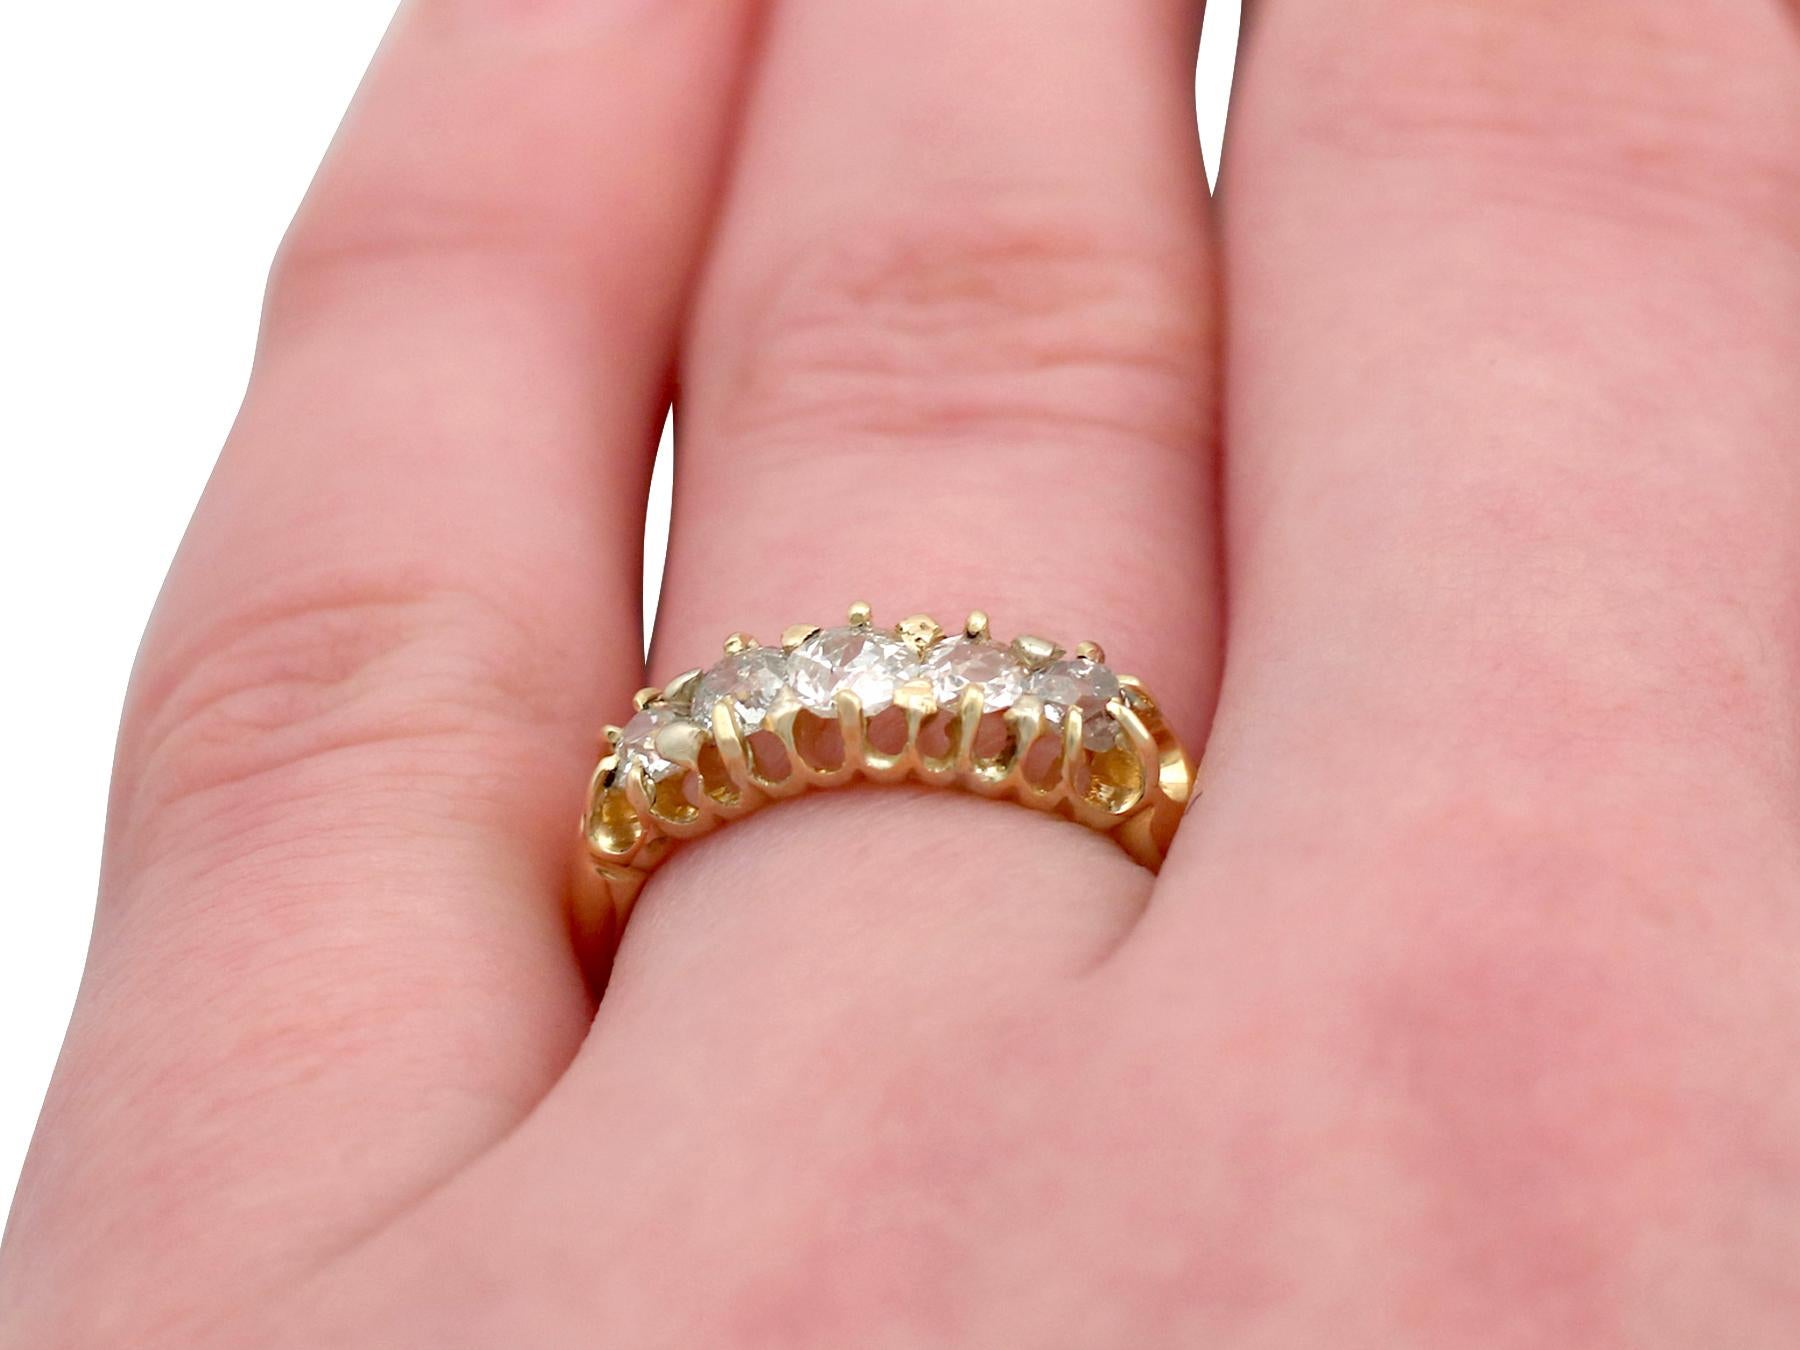 Antique Five Stone Diamond Ring in Yellow Gold 3